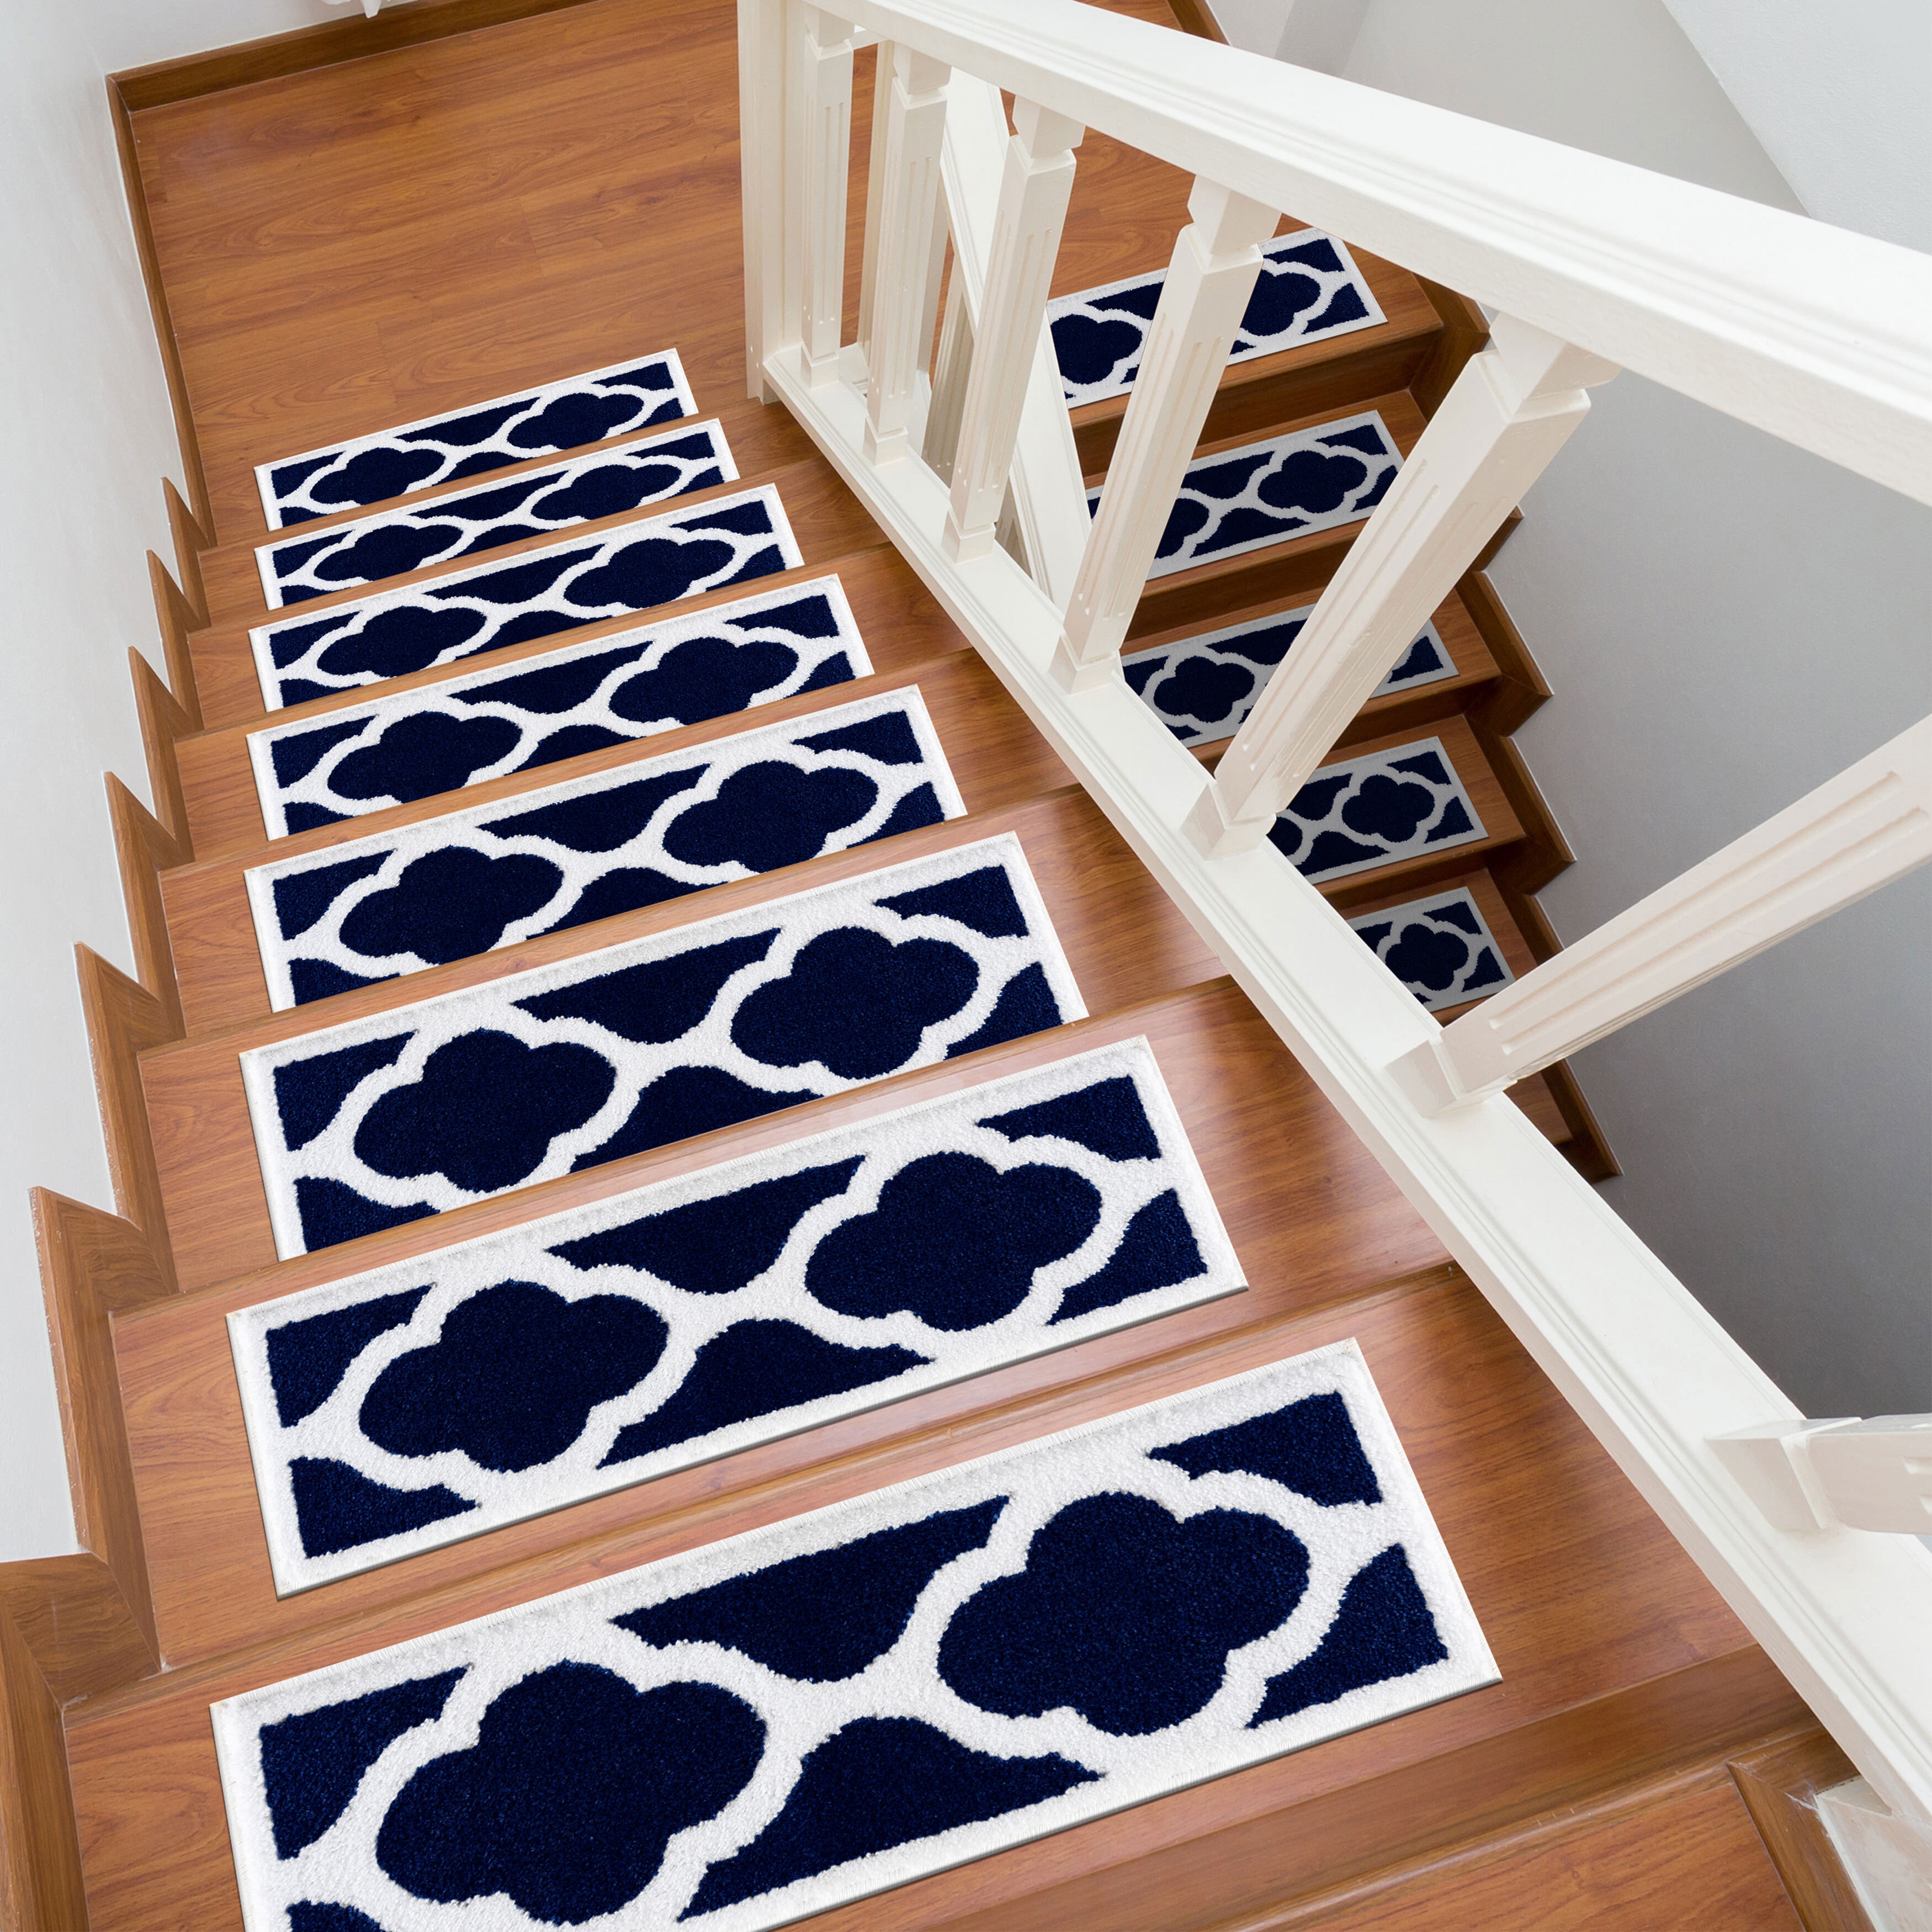 Durable Double Sided Carpet Tape | Events, Office or Home, Stairs Treads,  Rugs or Runners.